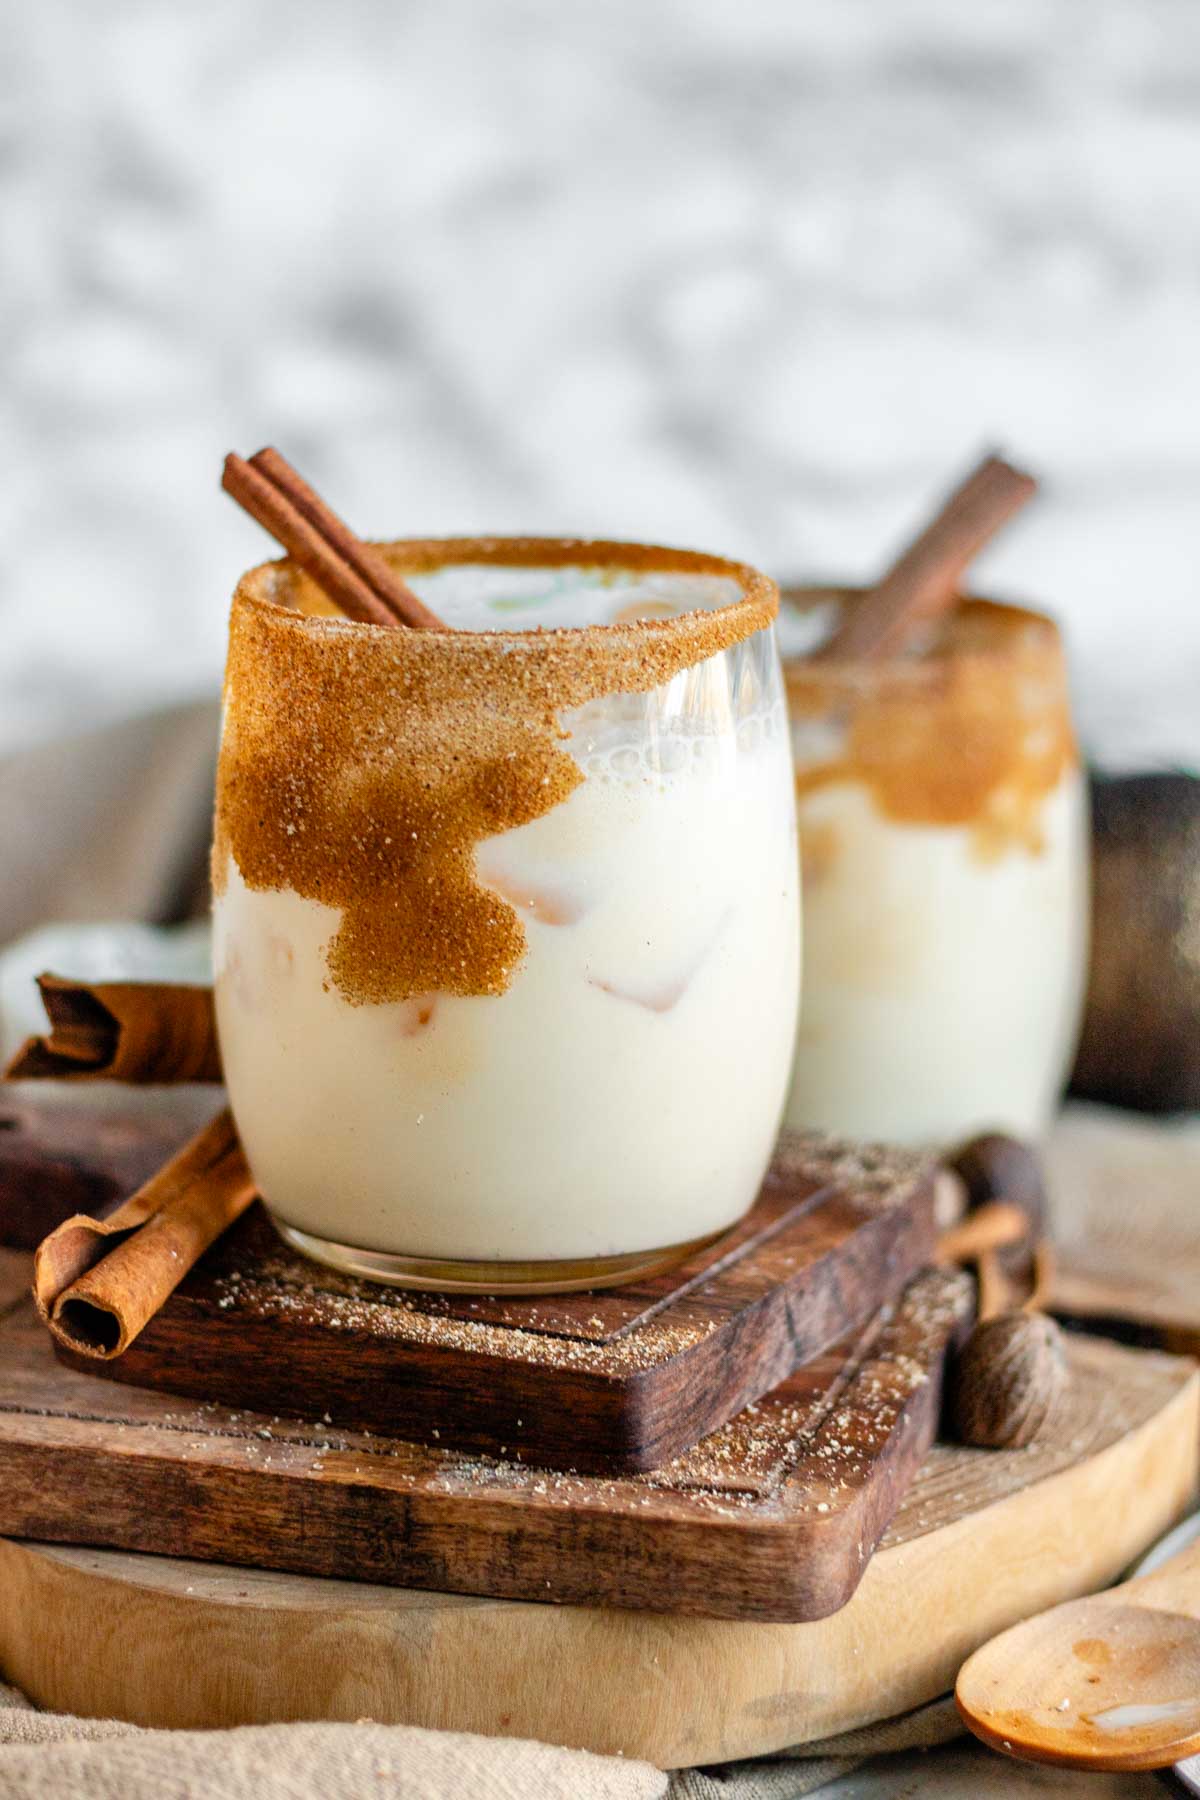 Eggnog in a glass rimmed with sugar and cinnamon with a cinnamon stick as garnish.